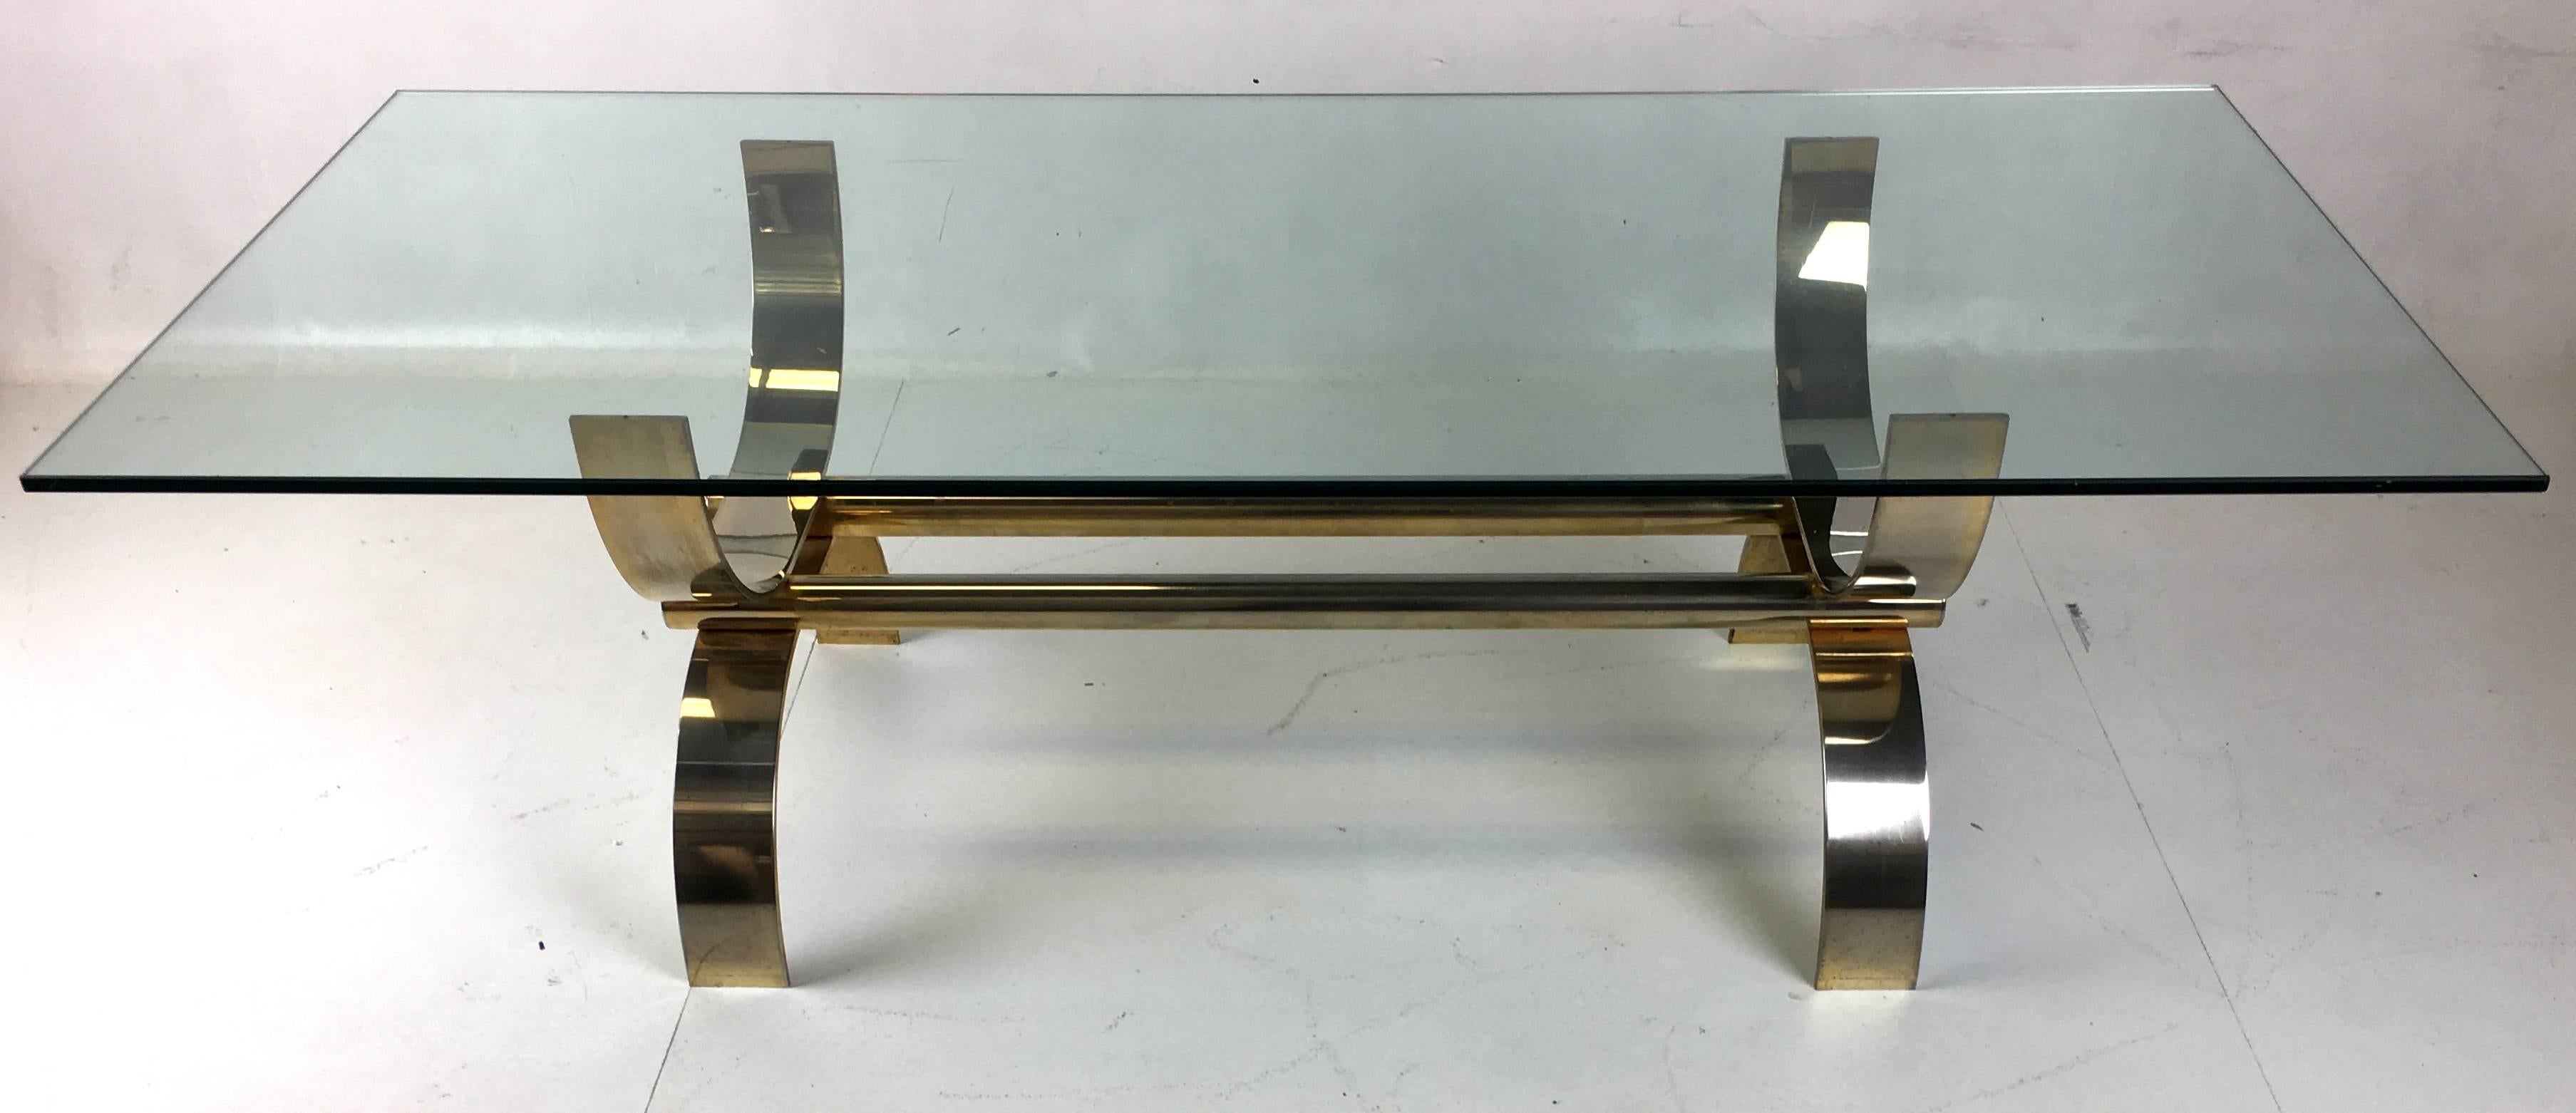 Large-scale Curule table constructed of solid brass-plated steel. The supports are 3.5